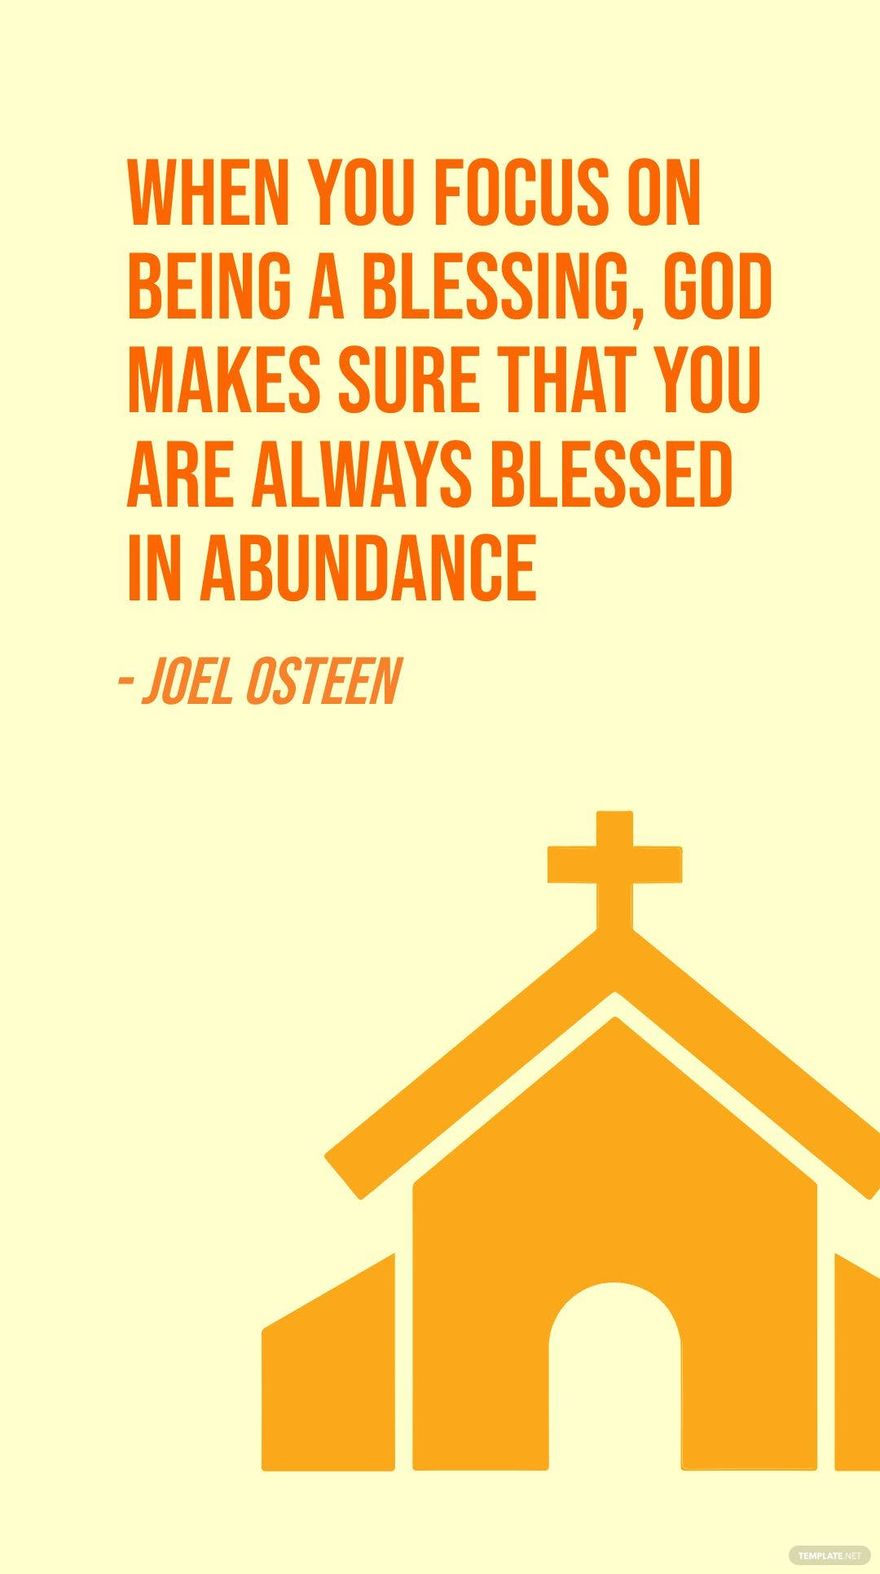 Joel Osteen - When you focus on being a blessing, God makes sure that you are always blessed in abundance in JPG